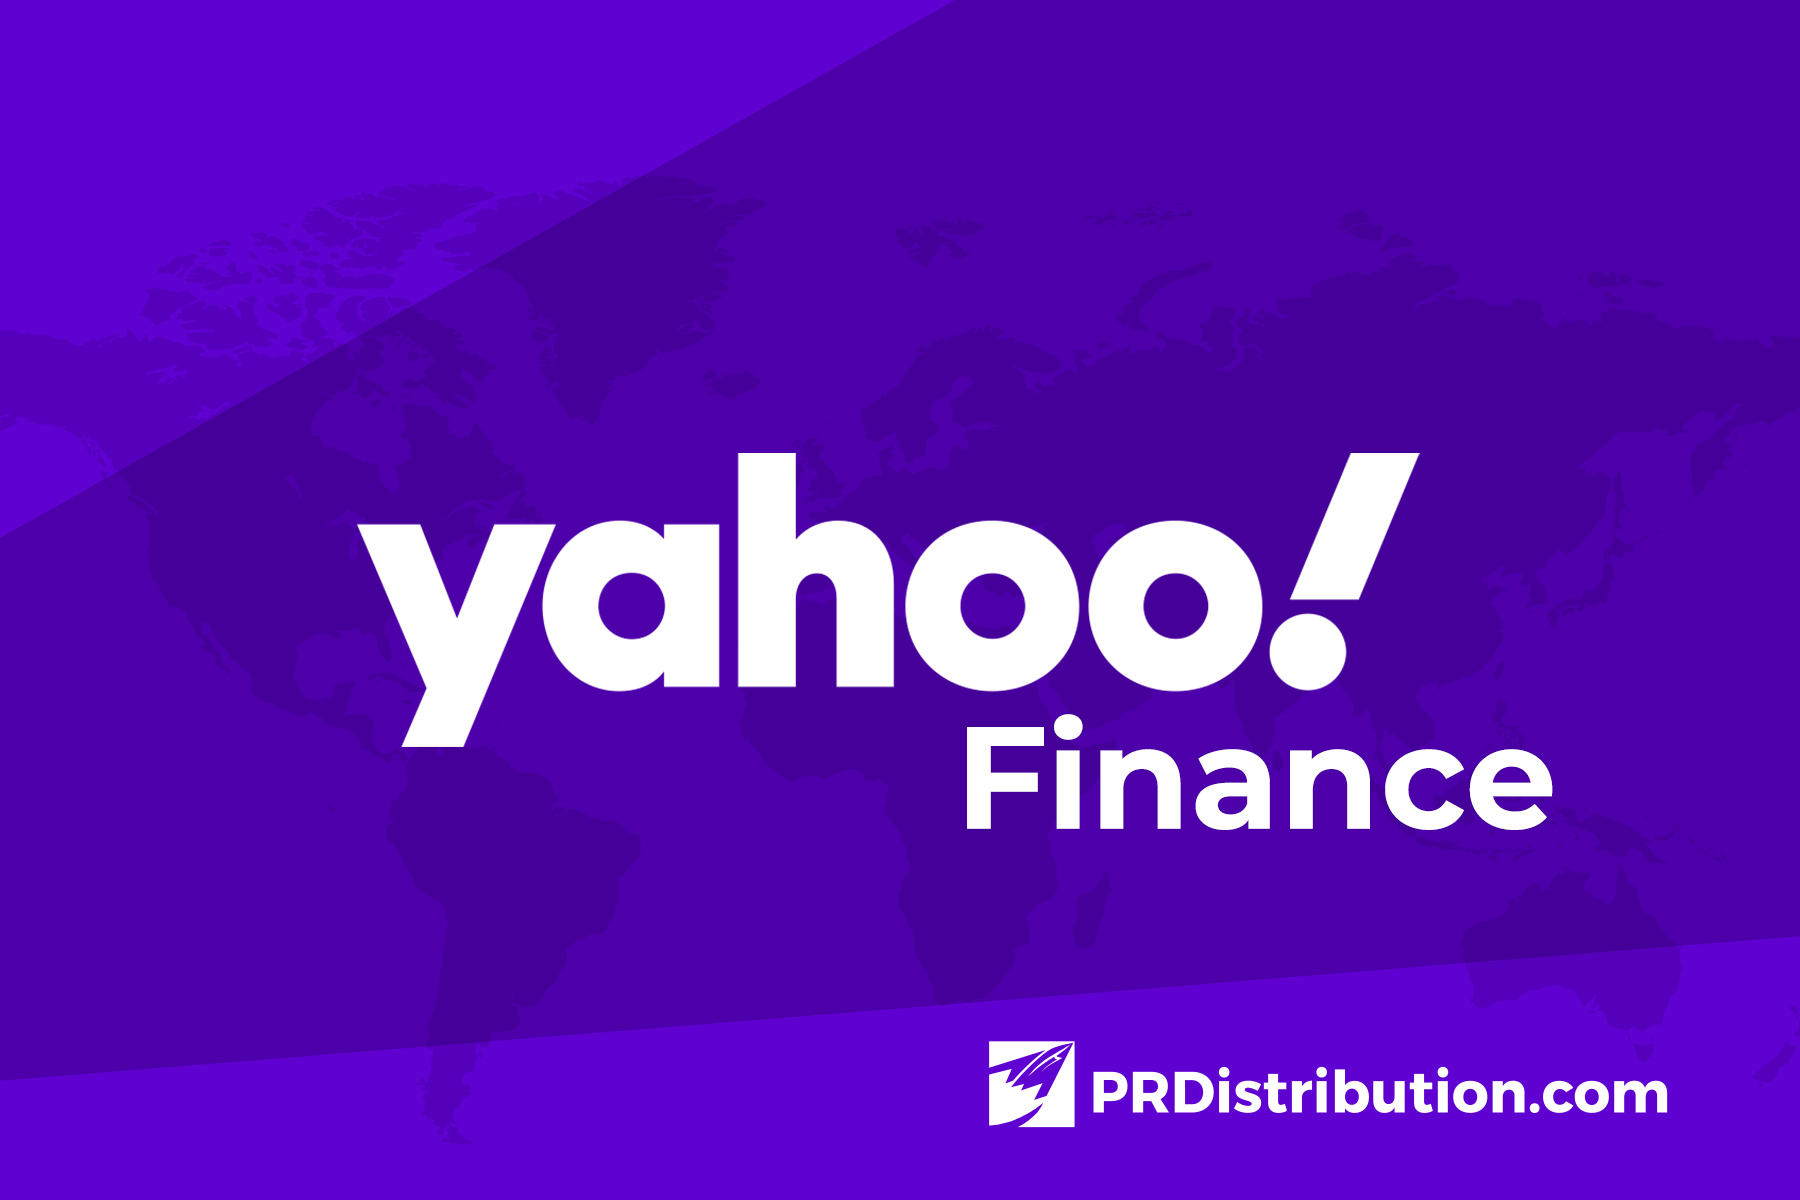 pr-distribution-reveals-how-to-get-published-on-yahoo-finance-using